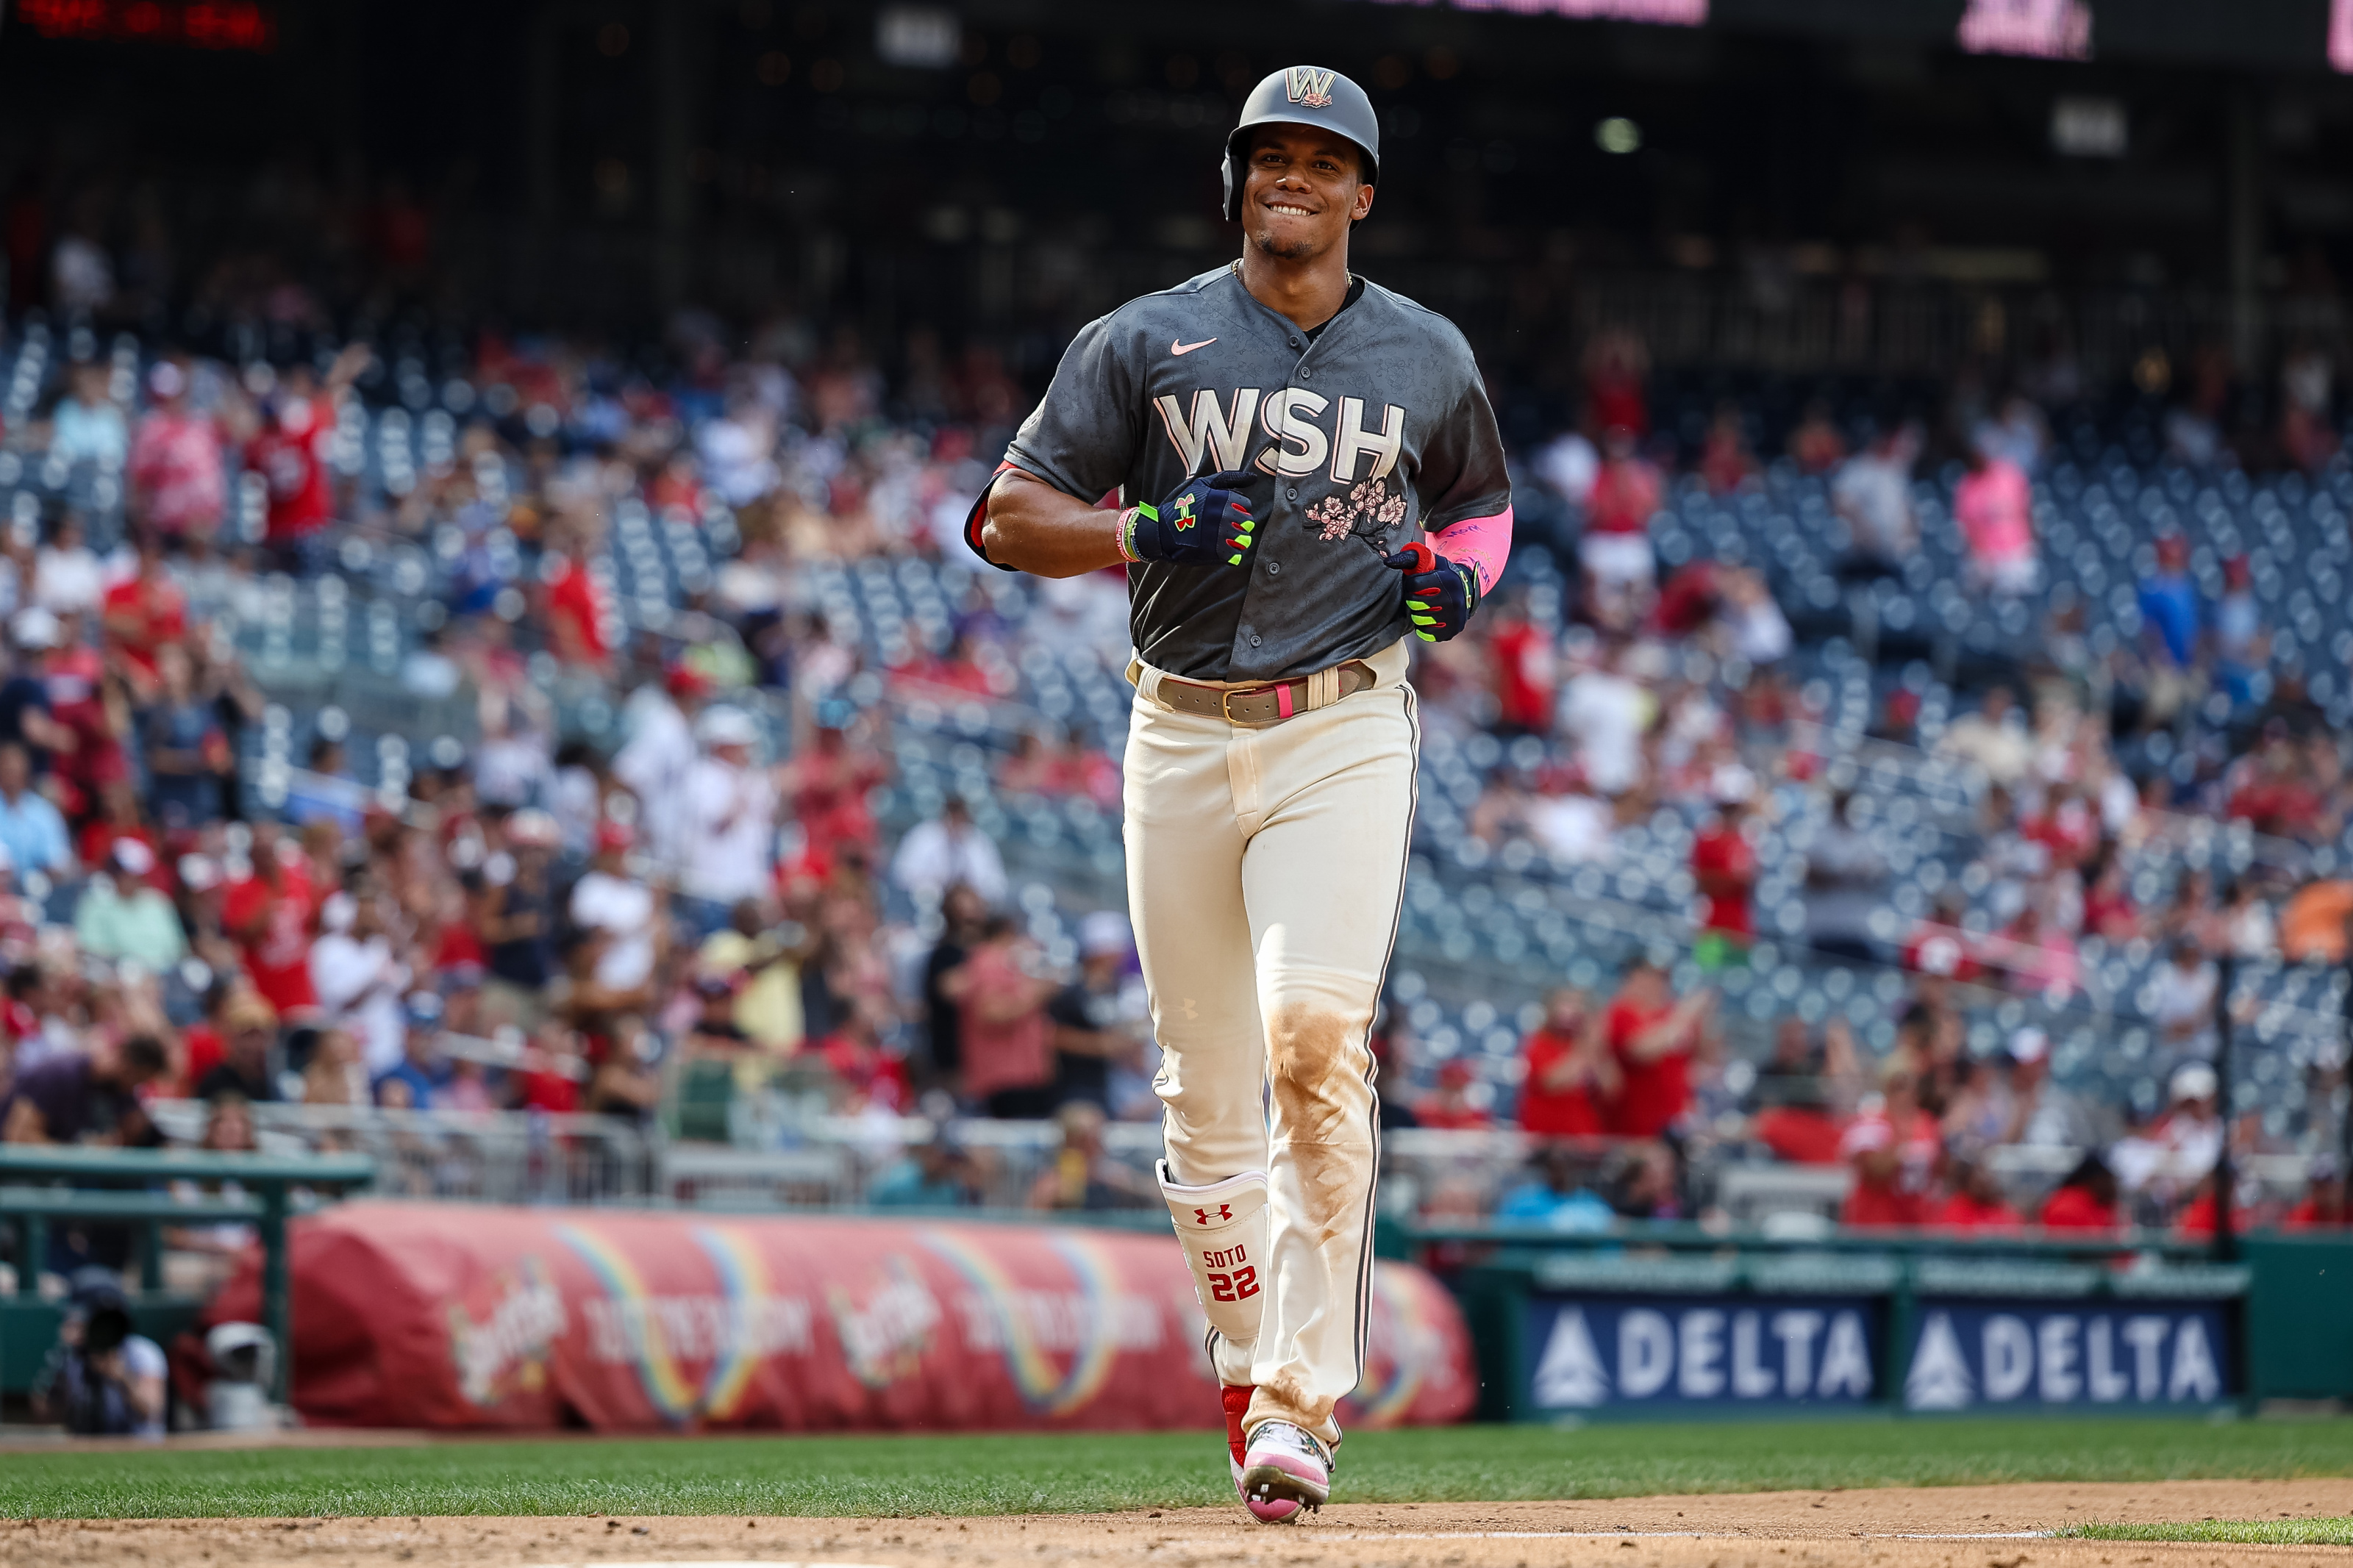 Will Juan Soto be in right field for the Washington Nationals in